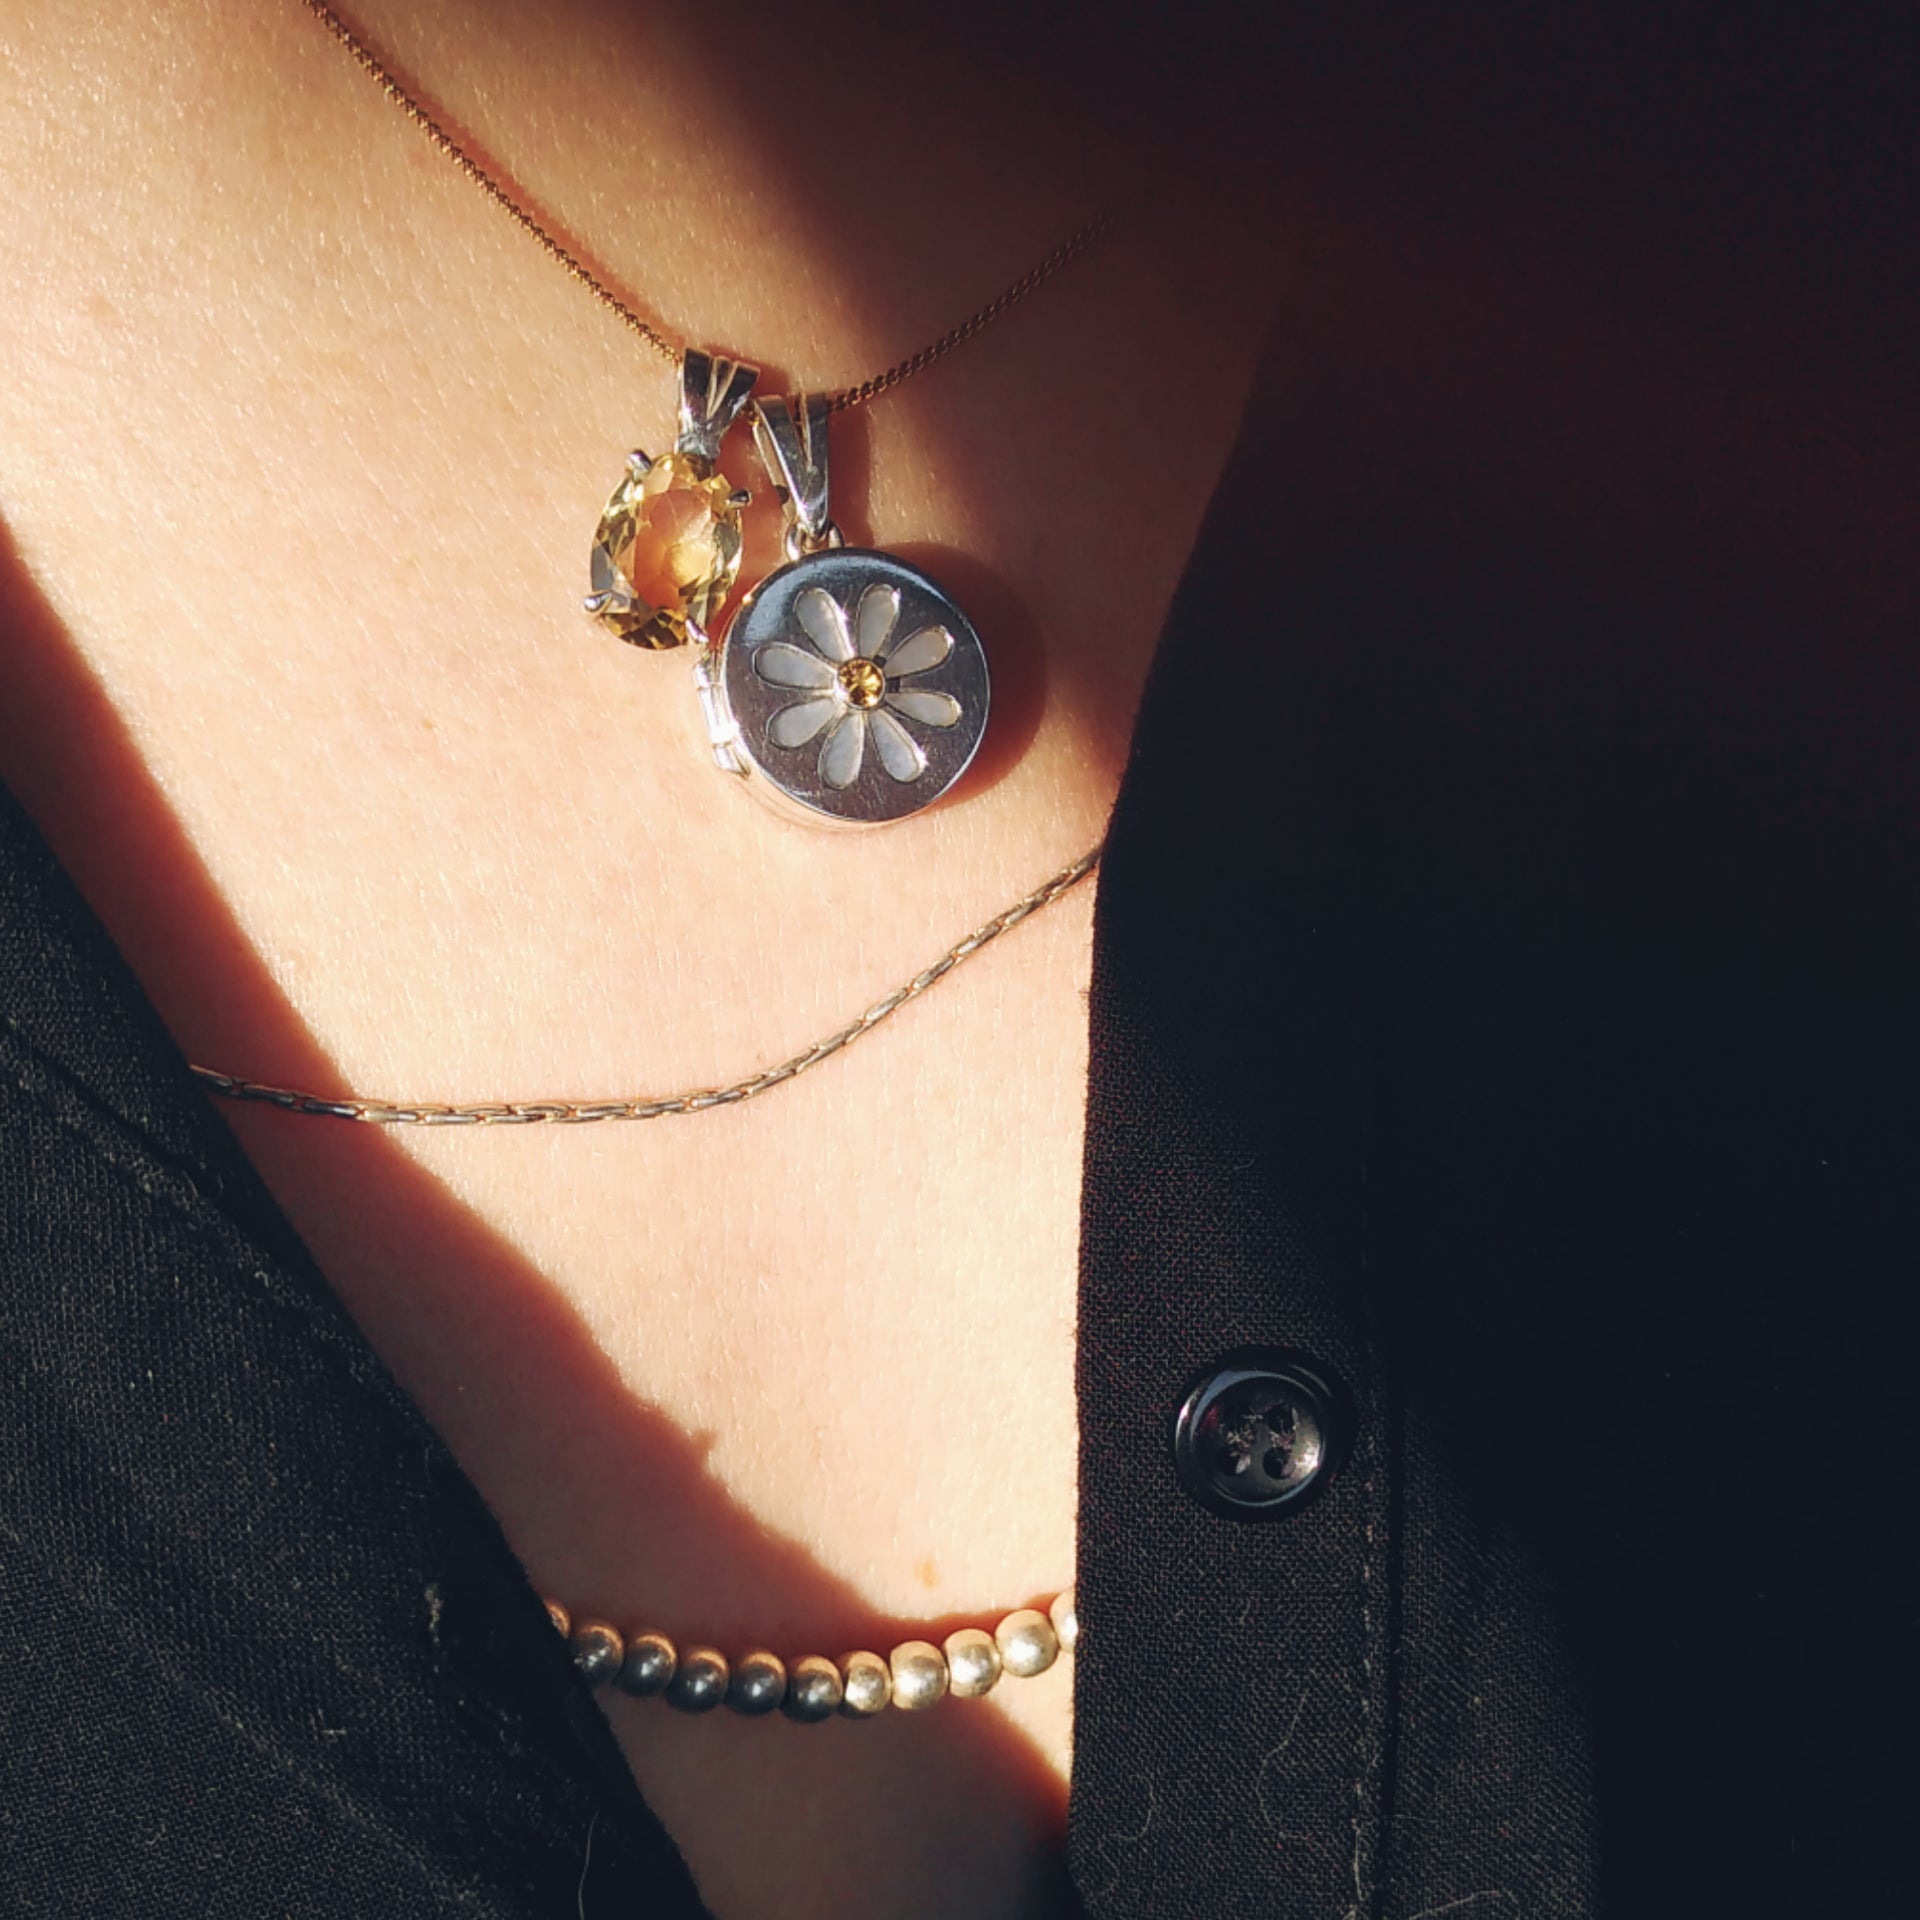 The daisy pendant displayed on a person, with two silver chains and a citrin pendant in oval cut. Made by hand by Casez Jewellery.